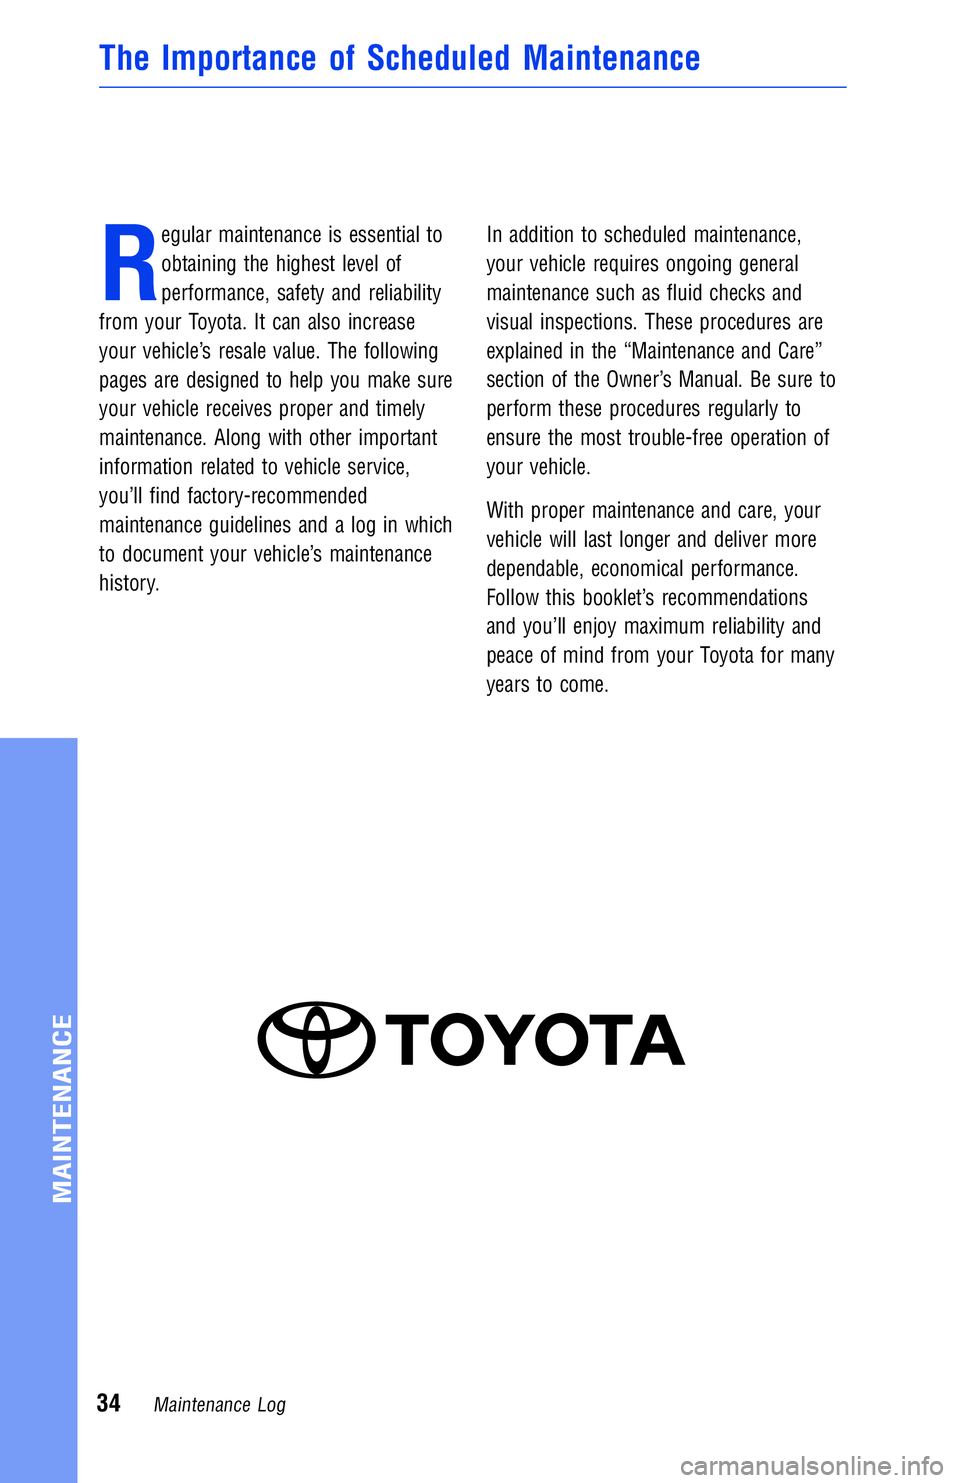 TOYOTA RAV4 2018  Warranties & Maintenance Guides (in English) R
egular maintenance is essential to
obtaining the highest level of
performance, safety and reliability
from your Toyota. It can also increase
your vehicle’s resale value. The following
pages are de